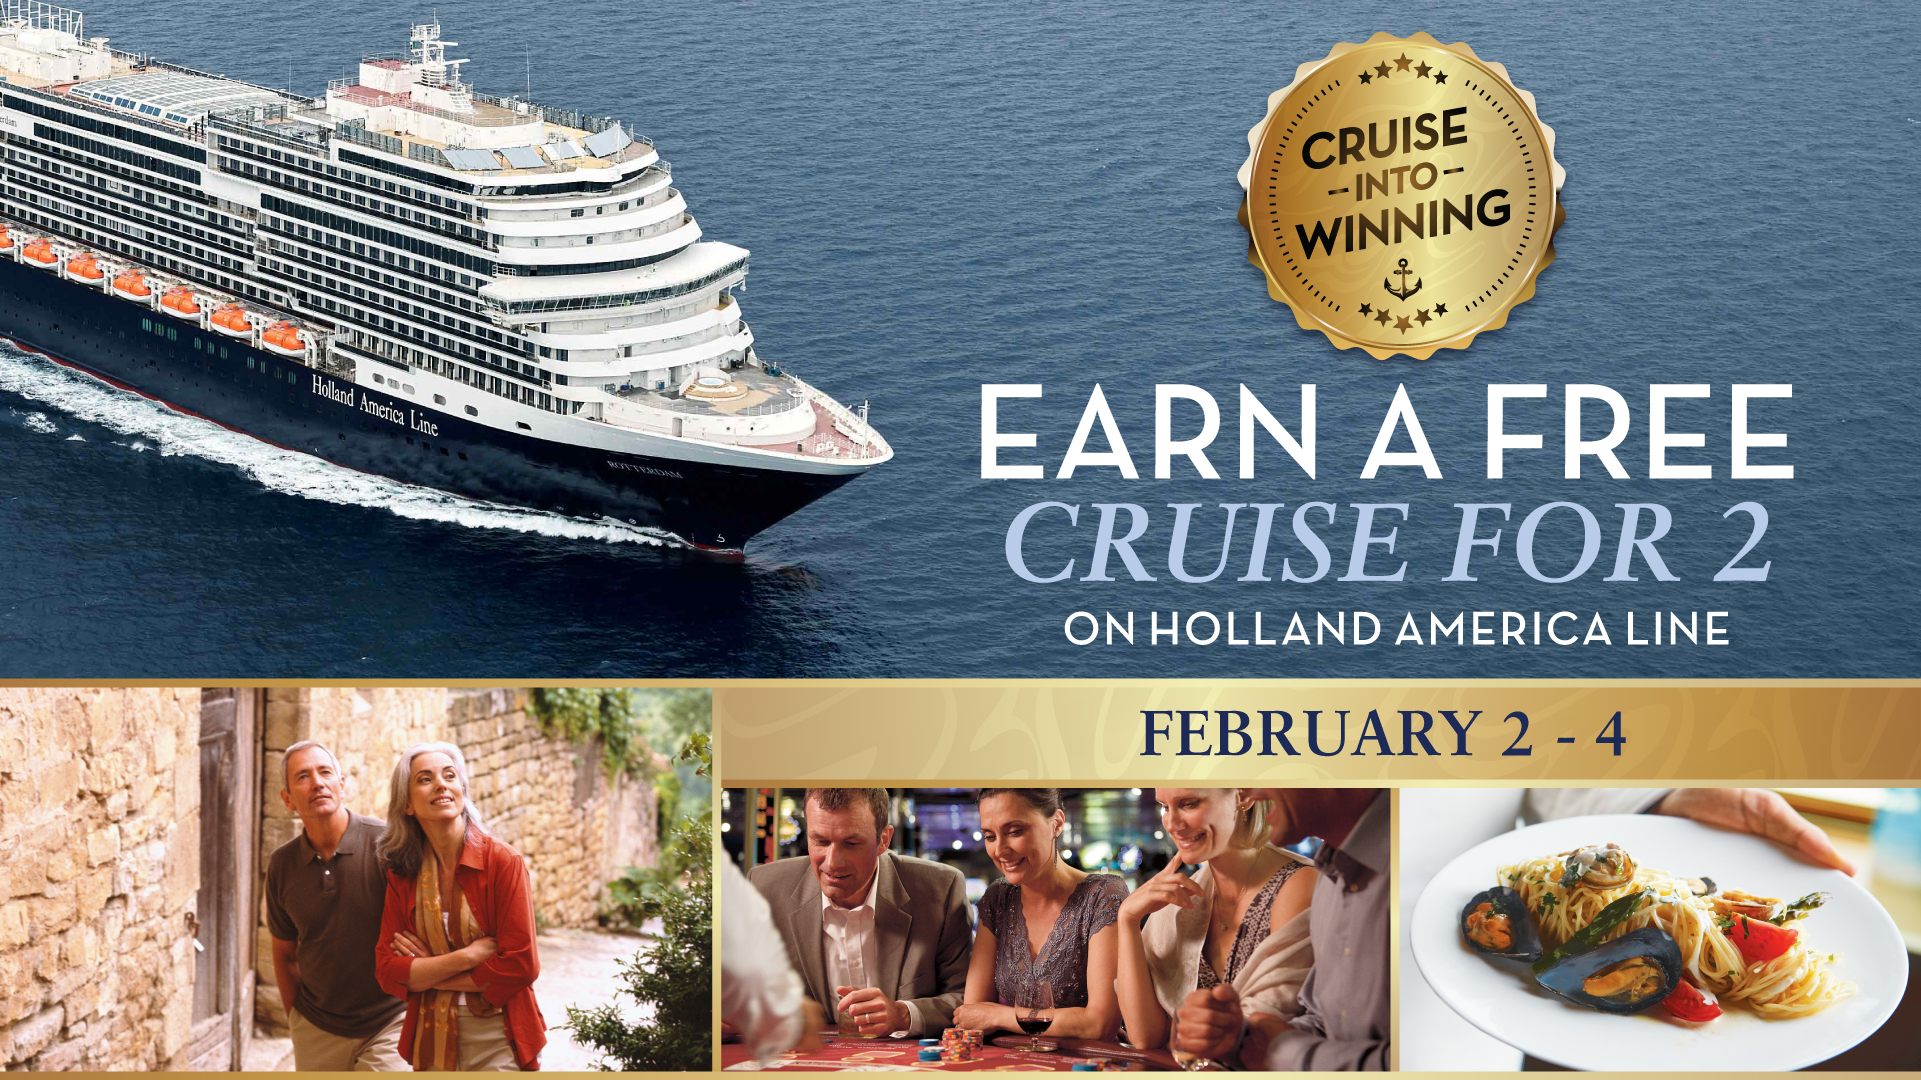 Cruise Into Winning Earn A Free Cruise For 2 On Holland America Line February 2-4